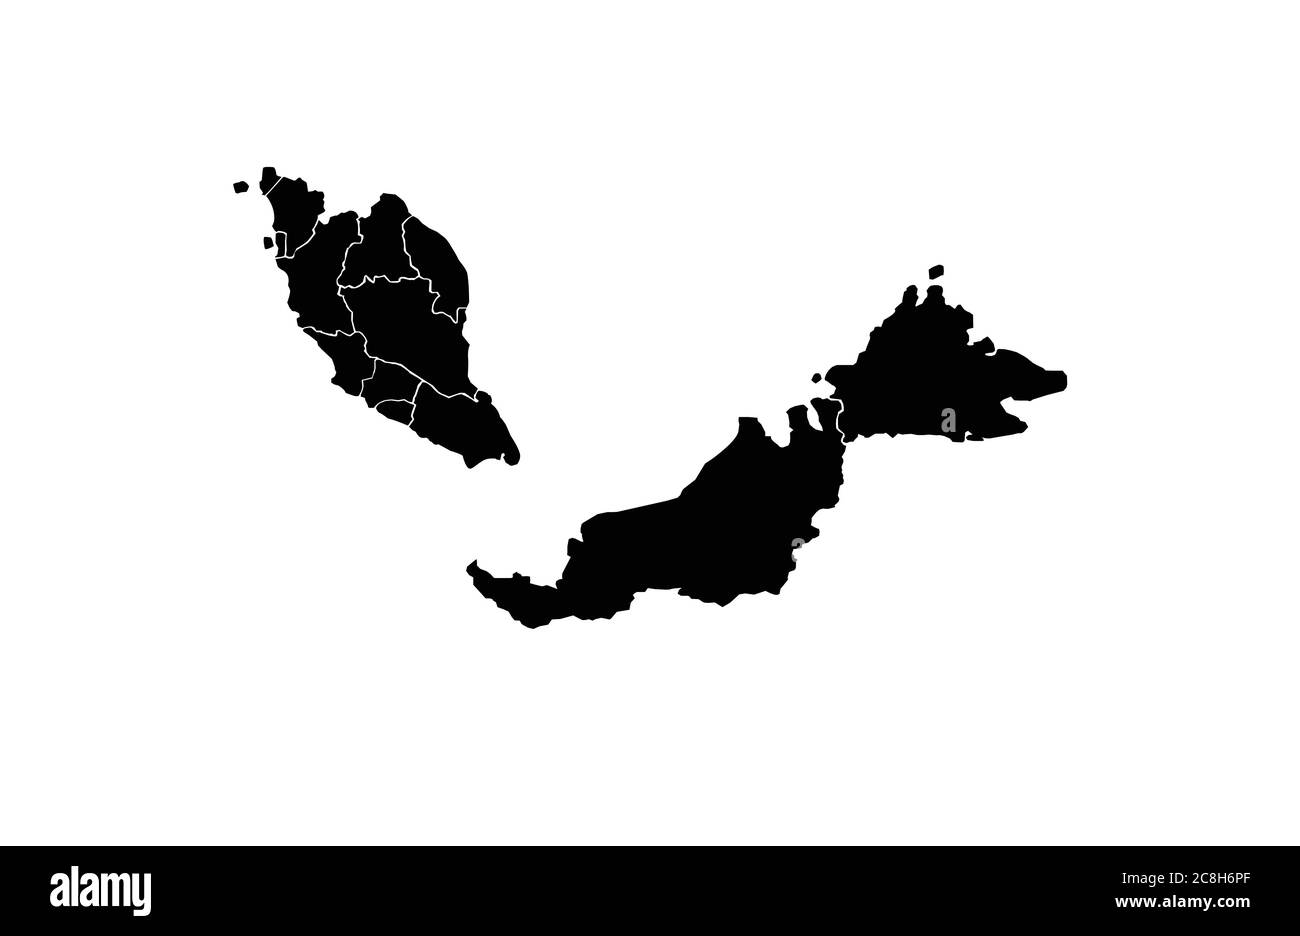 Malaysia map outline vector illustration Stock Vector